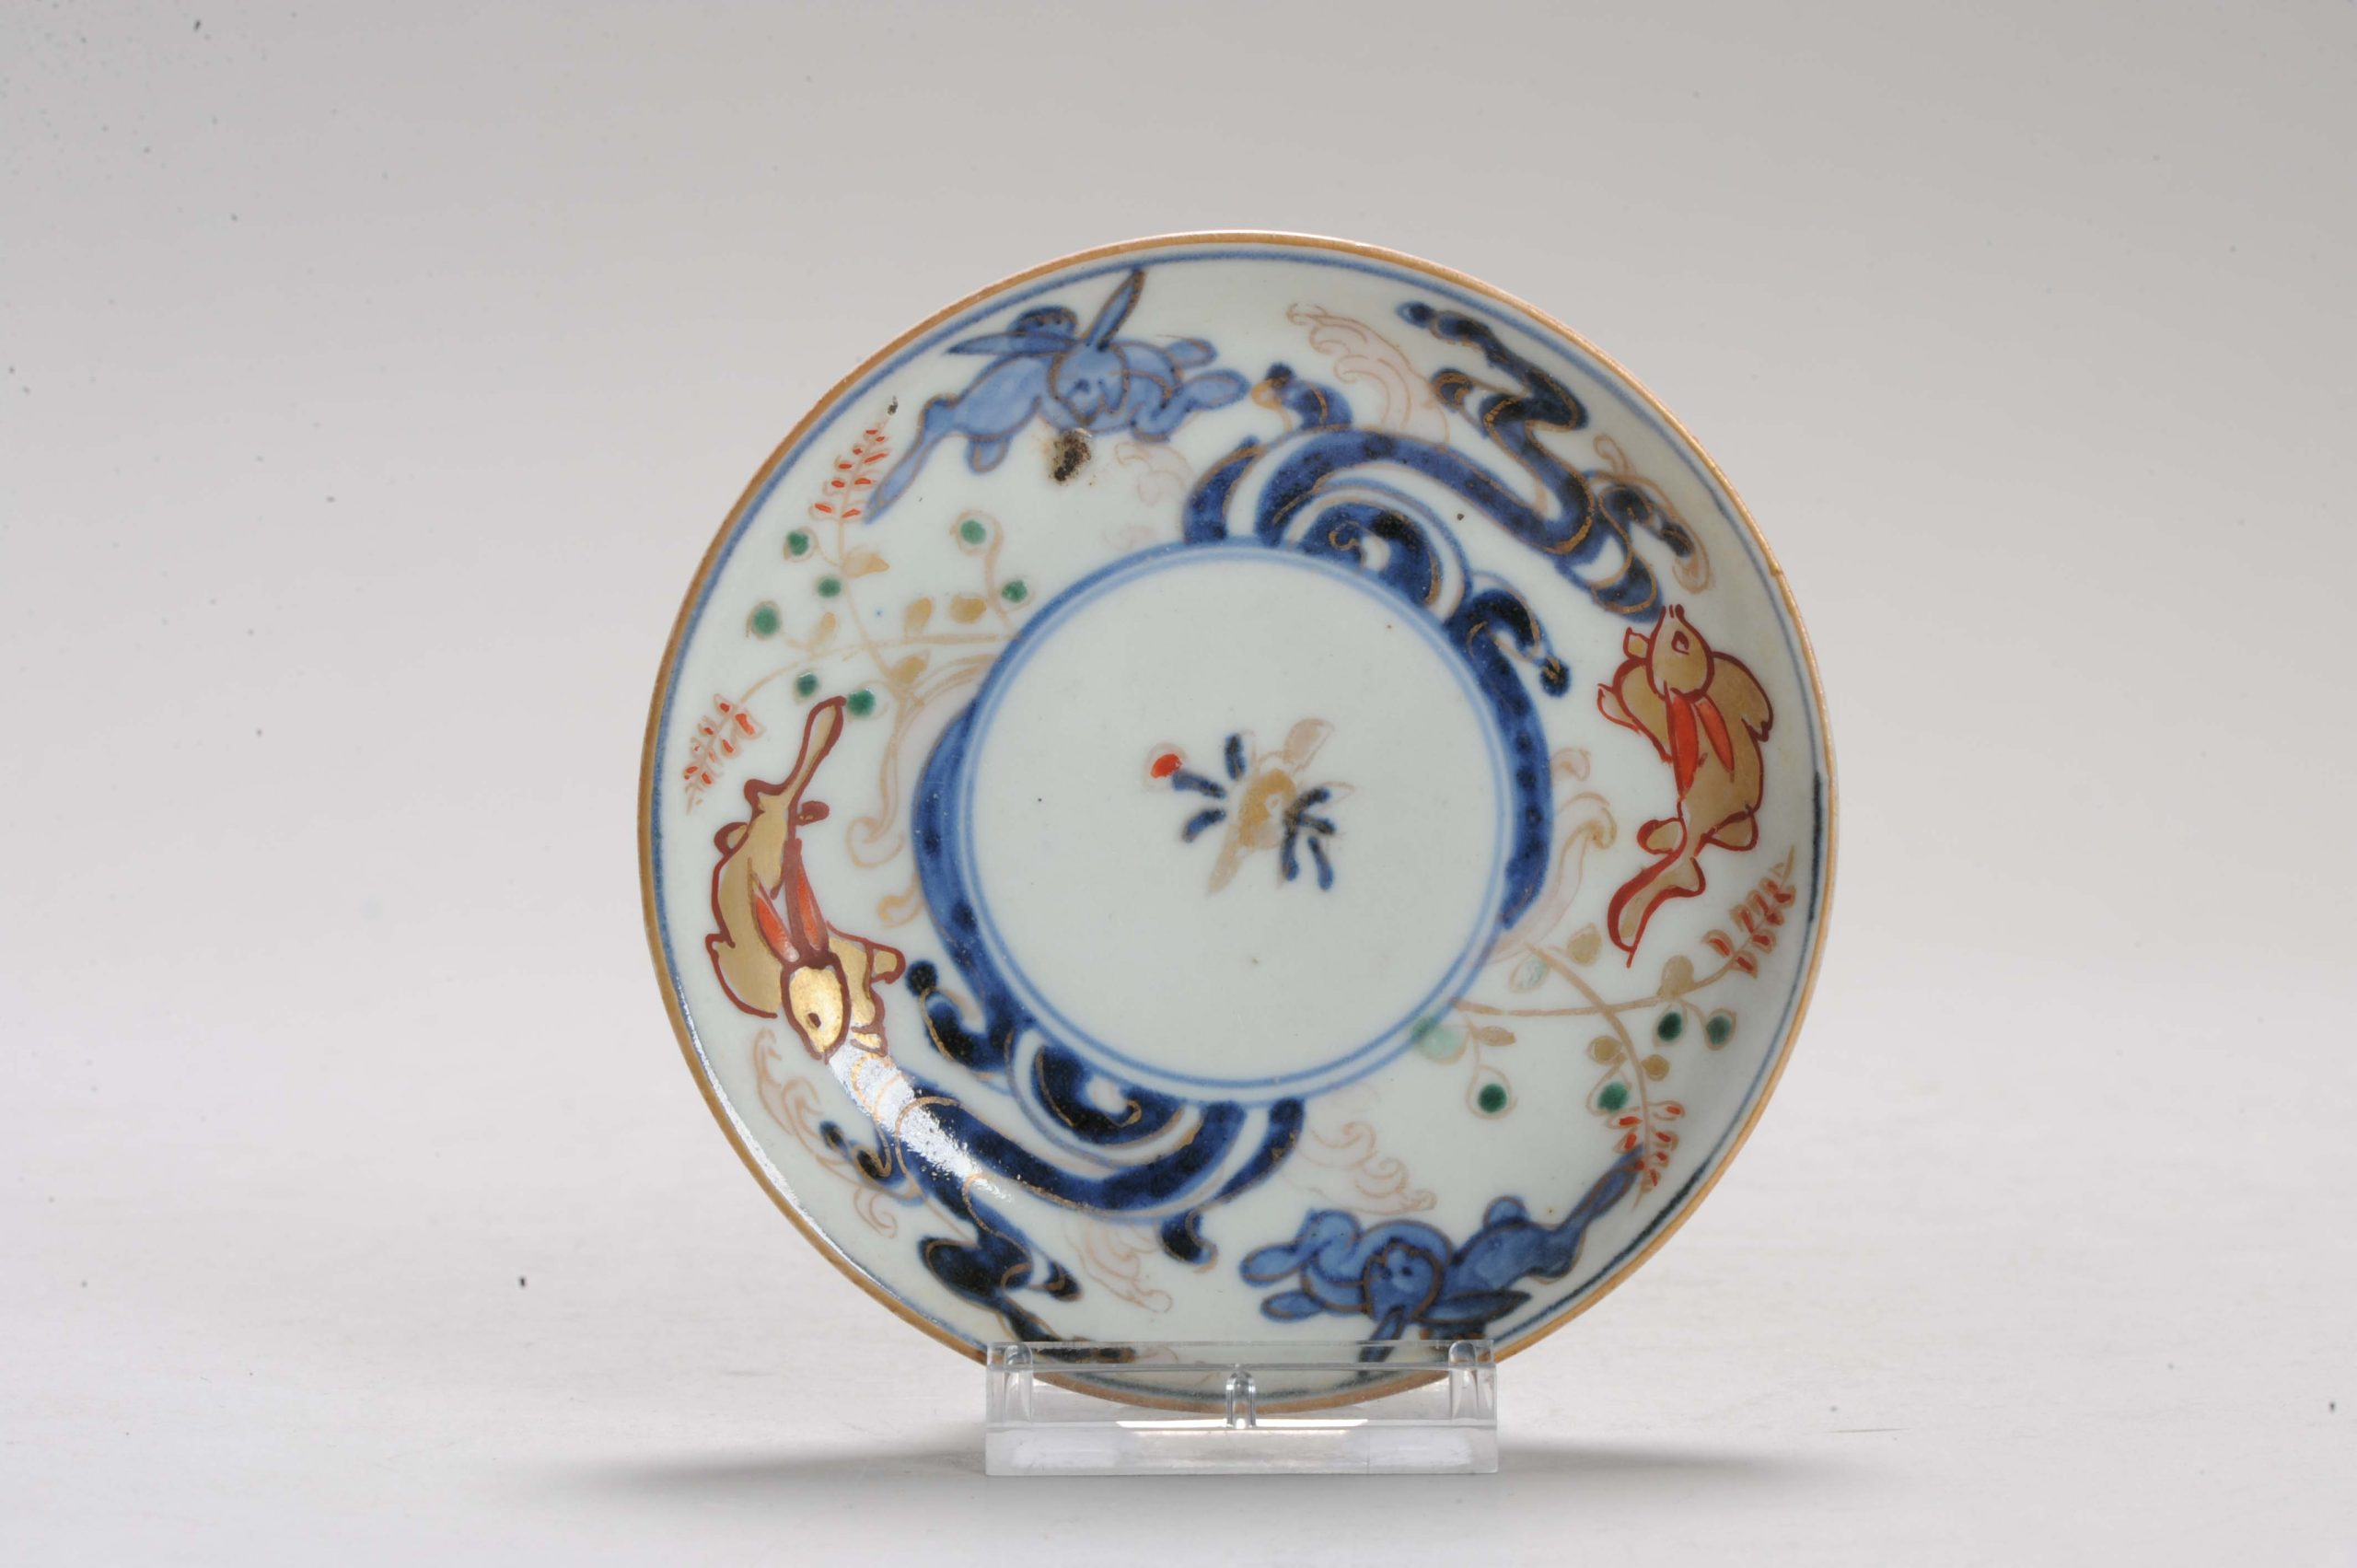 1181 Antique Japanese porcelain Dish with Running Hares Japan